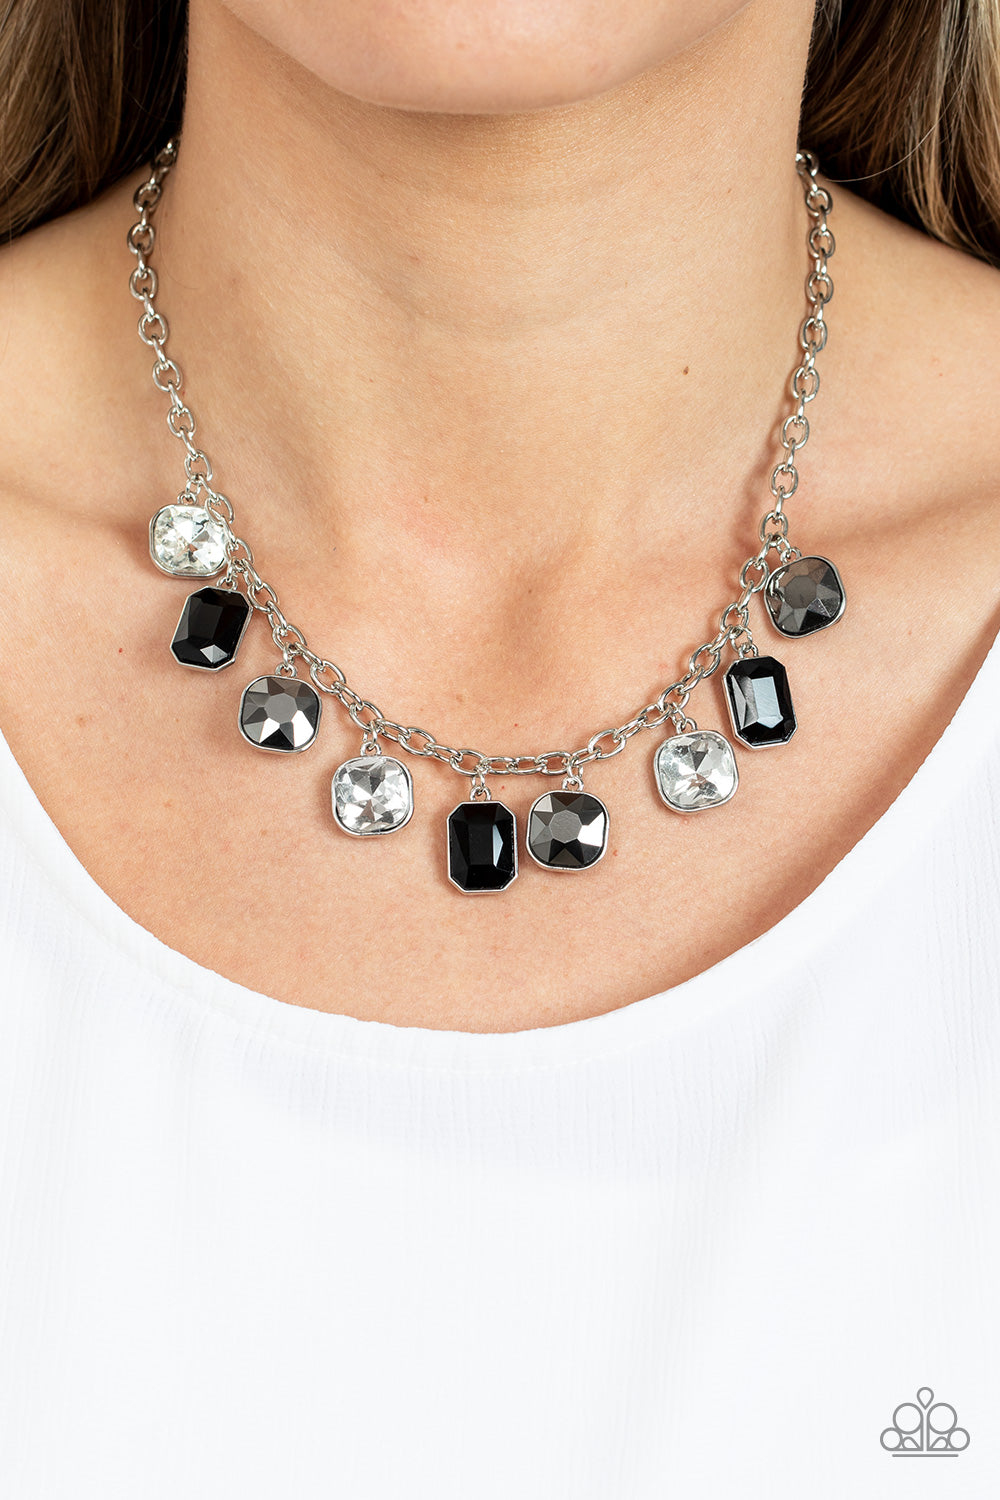 Best Decision Ever - Silver & Hematite, Black, & White Rhinestone Paparazzi Necklace & matching earrings